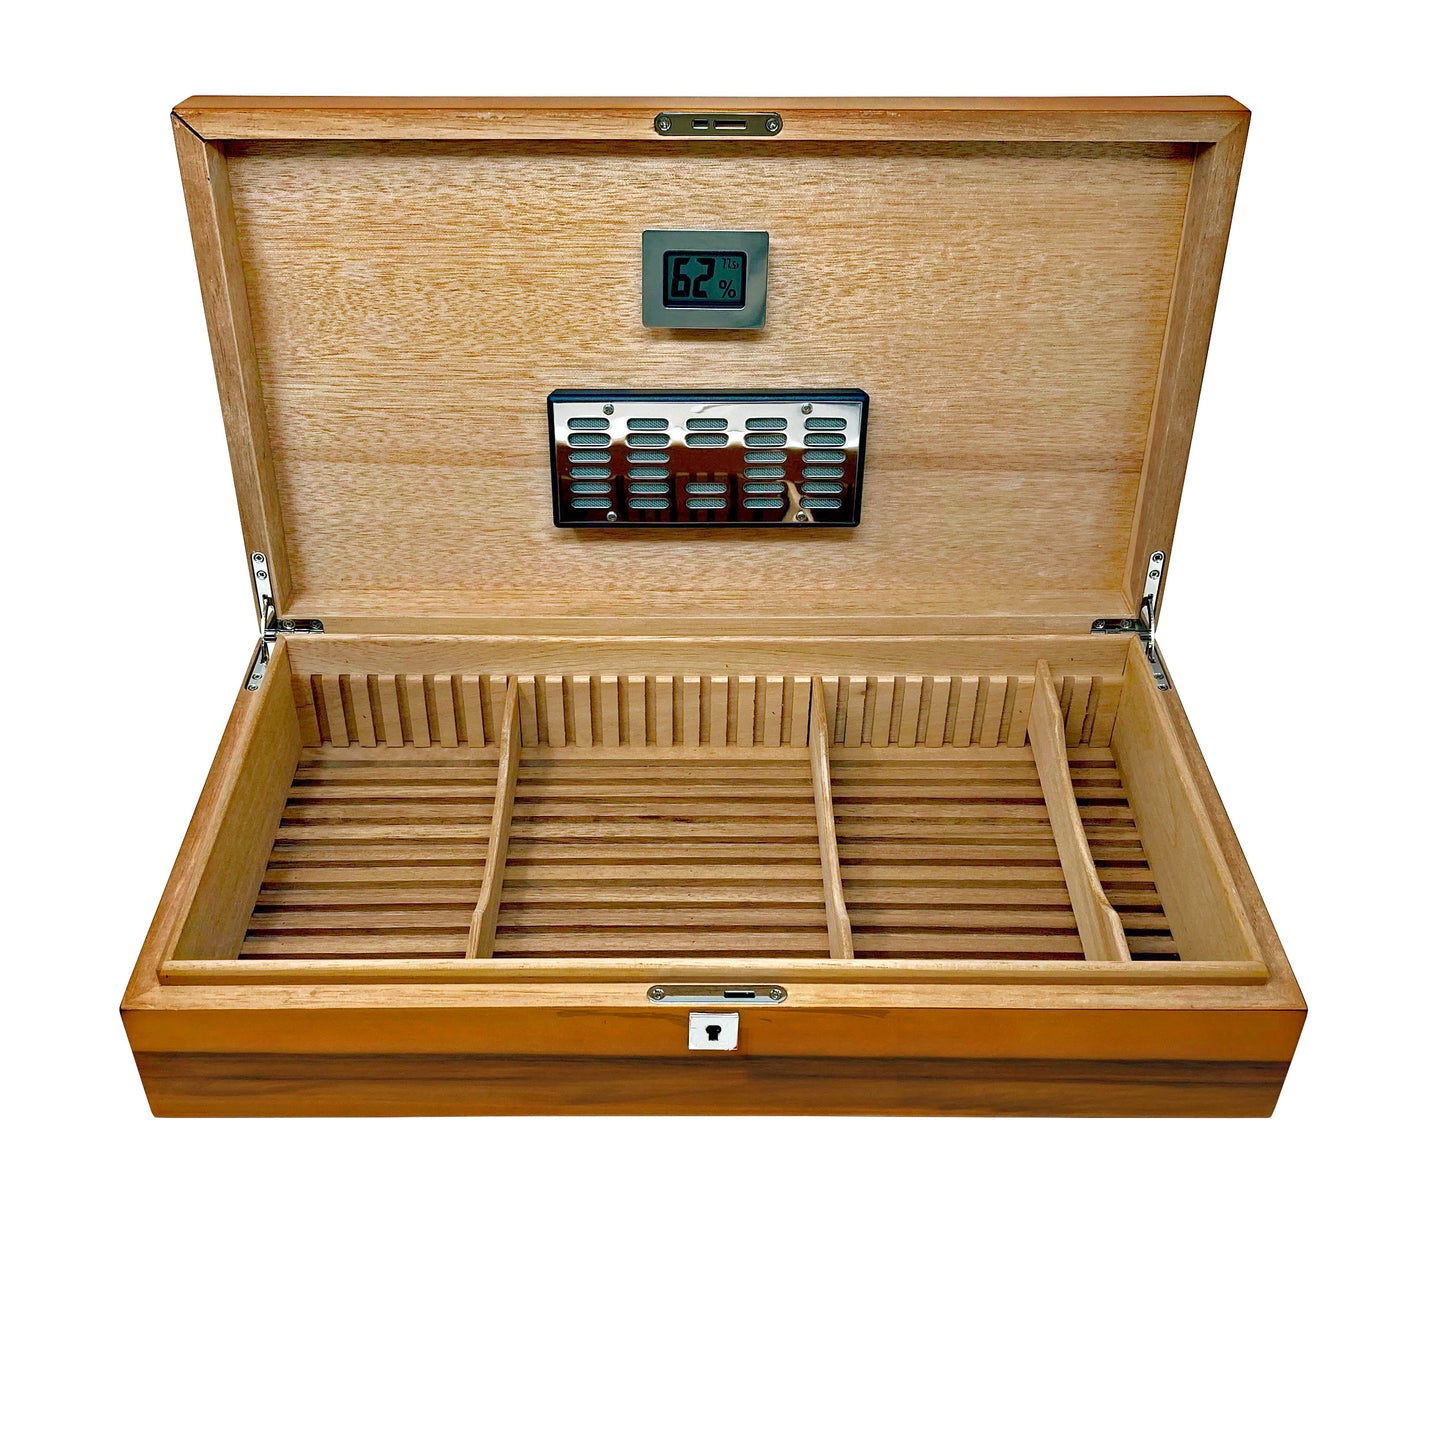 The Winchester Humidor.